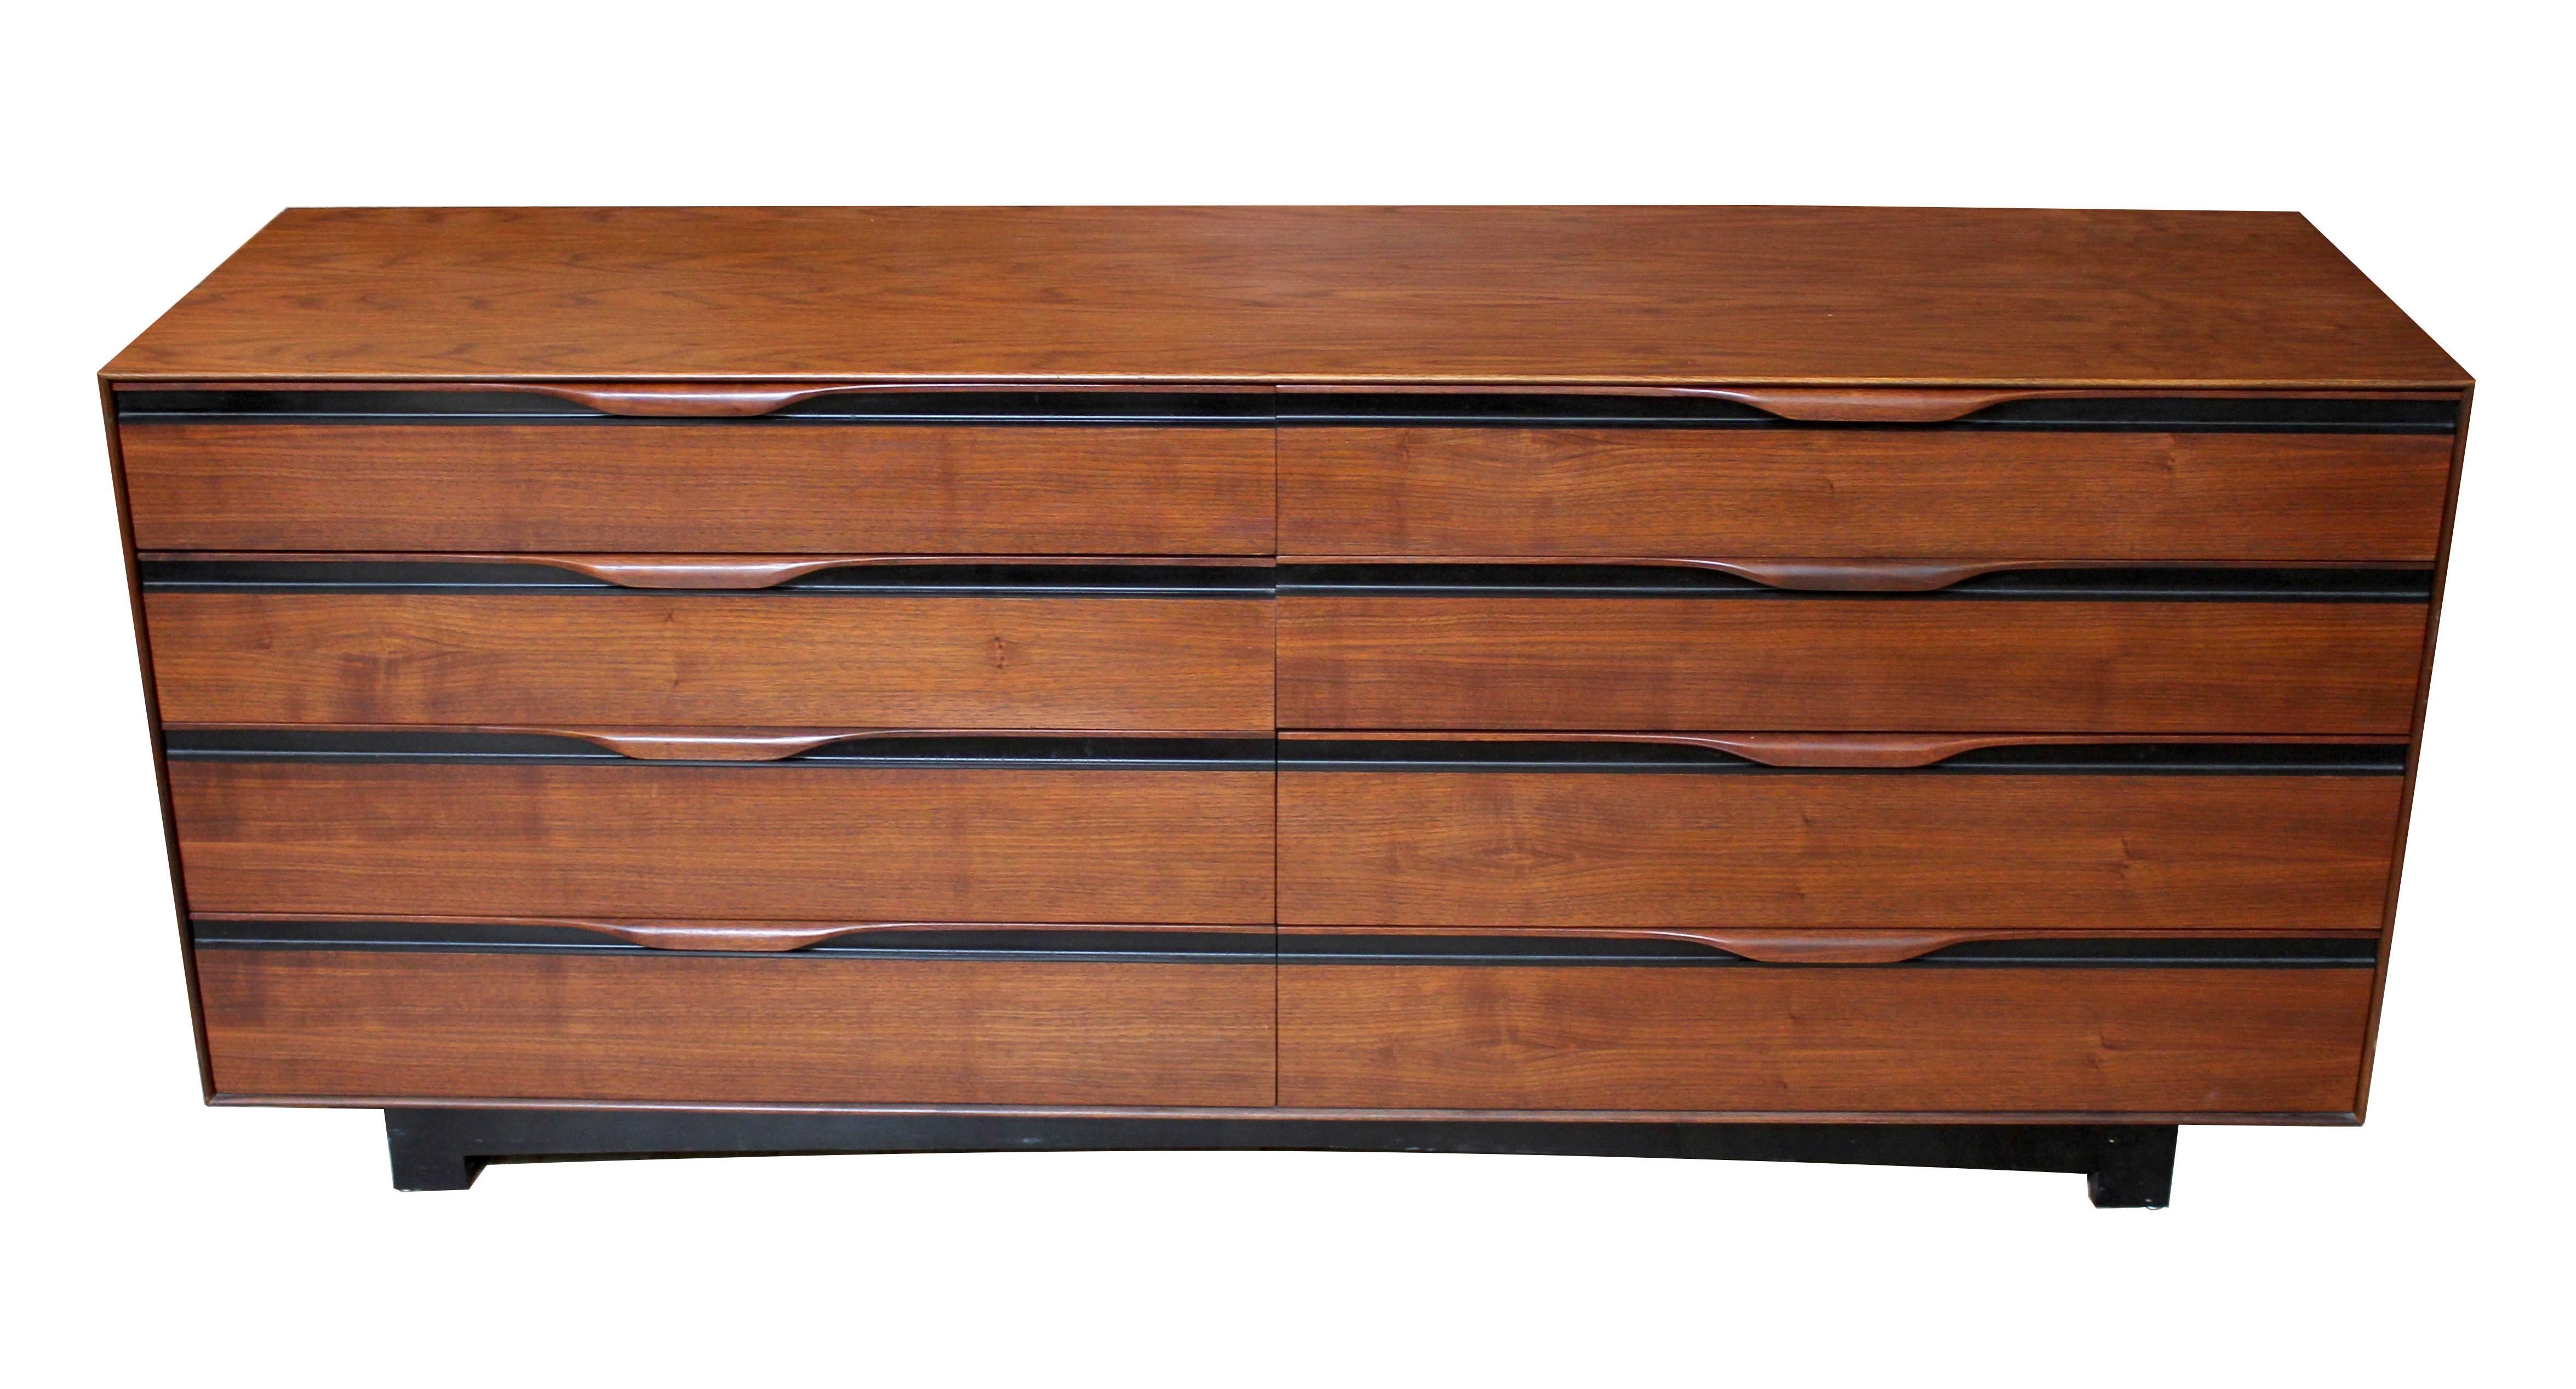 1960s eight-drawer walnut dresser designed by John Kapel for Glenn of California. In excellent condition, with Kapel's distinctive sculptural pulls with black acrylic trim.